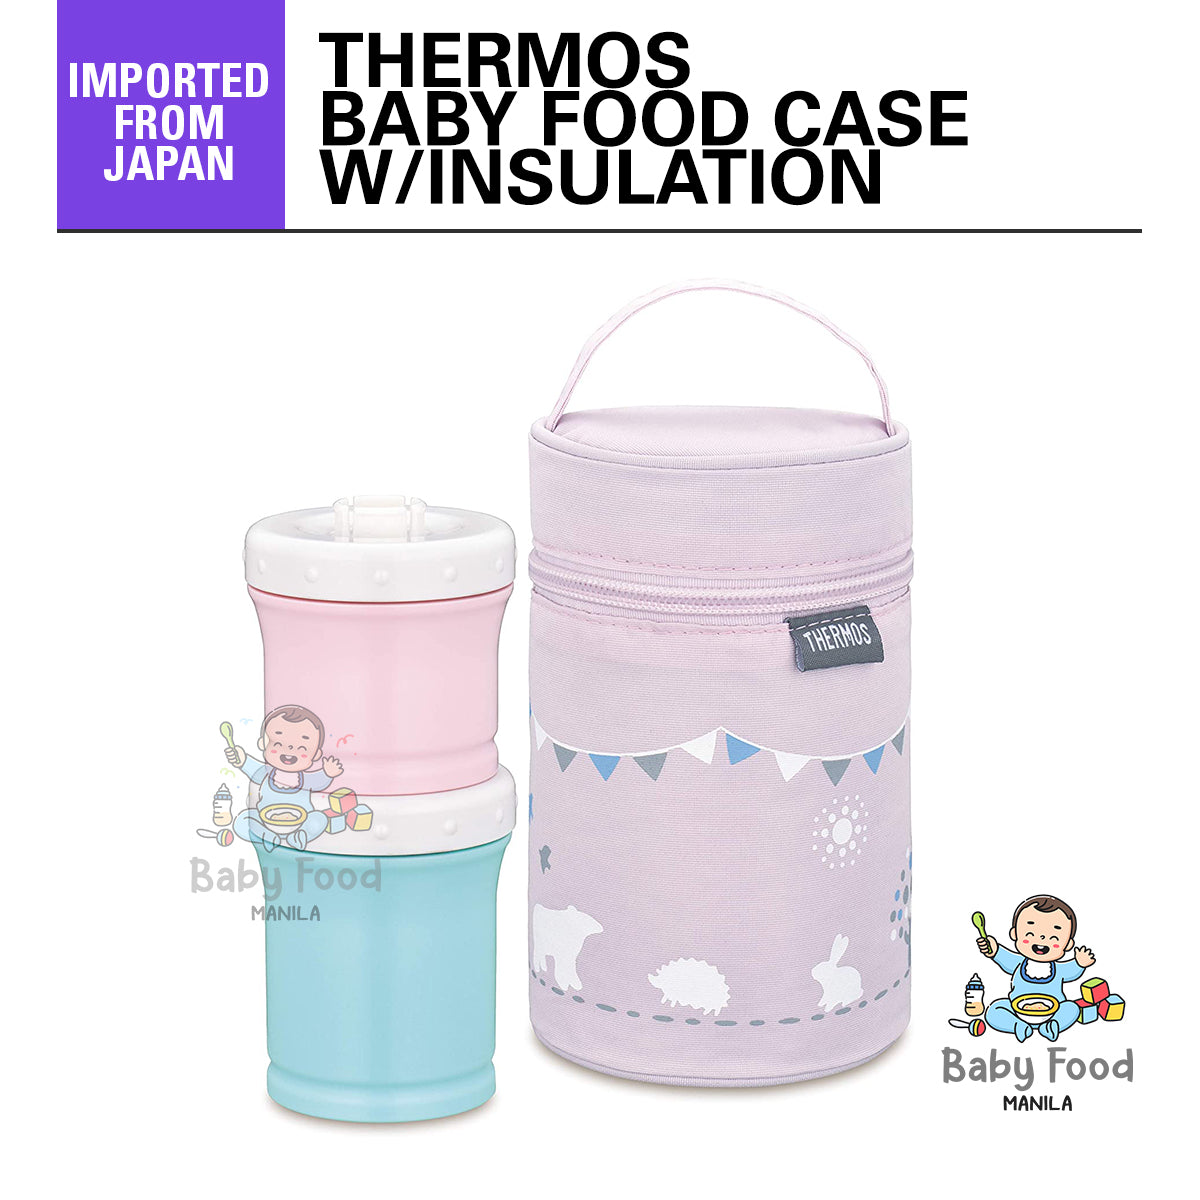 THERMOS Baby food case with insulation – babyfoodmanila